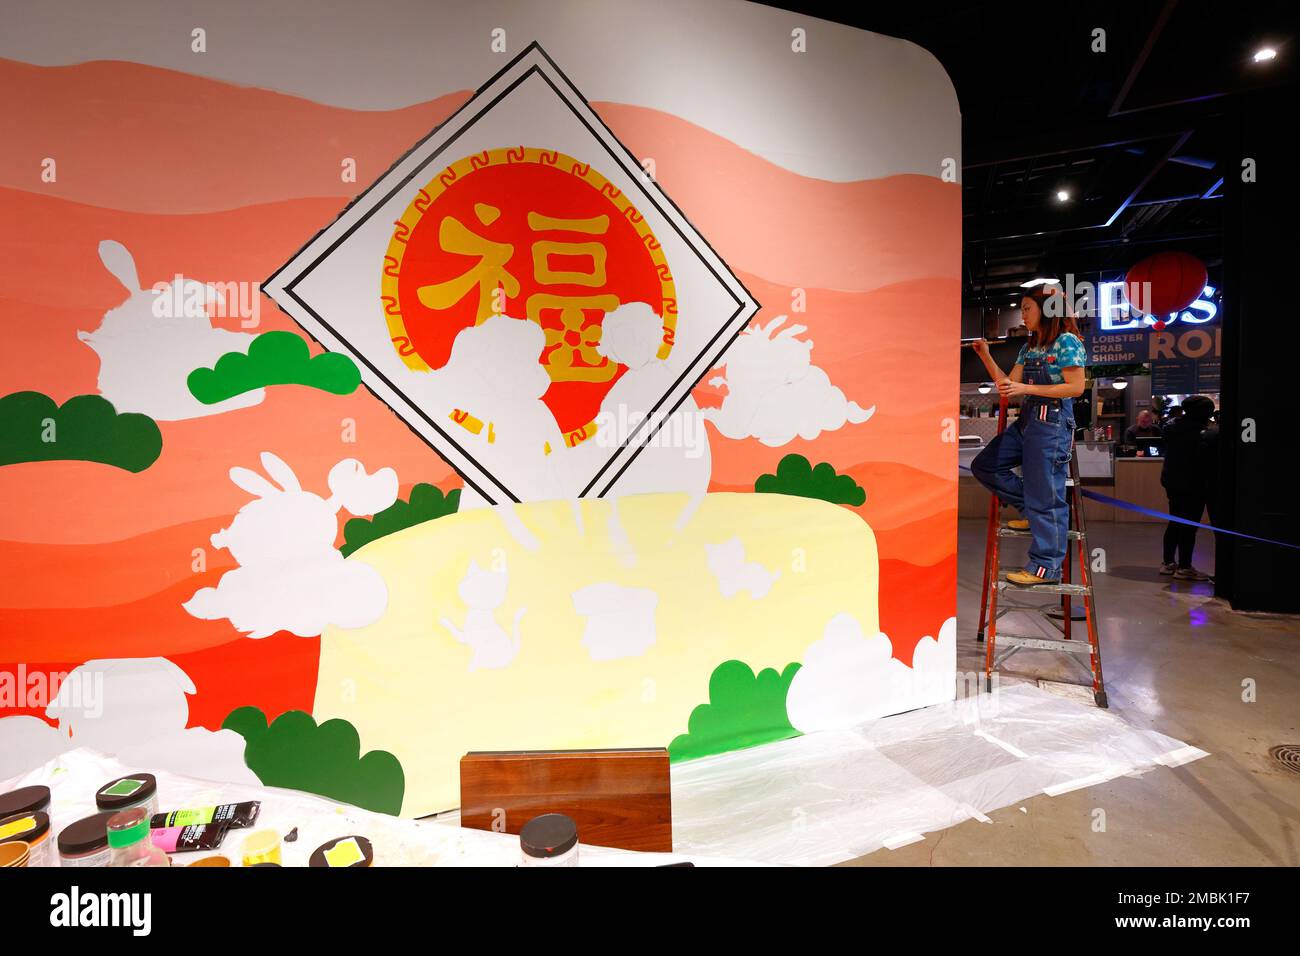 Artist Helen So works on a Lunar New Year painting at the Essex Market in New York City, January 16, 2023. The painting features ...(see more details) Stock Photo